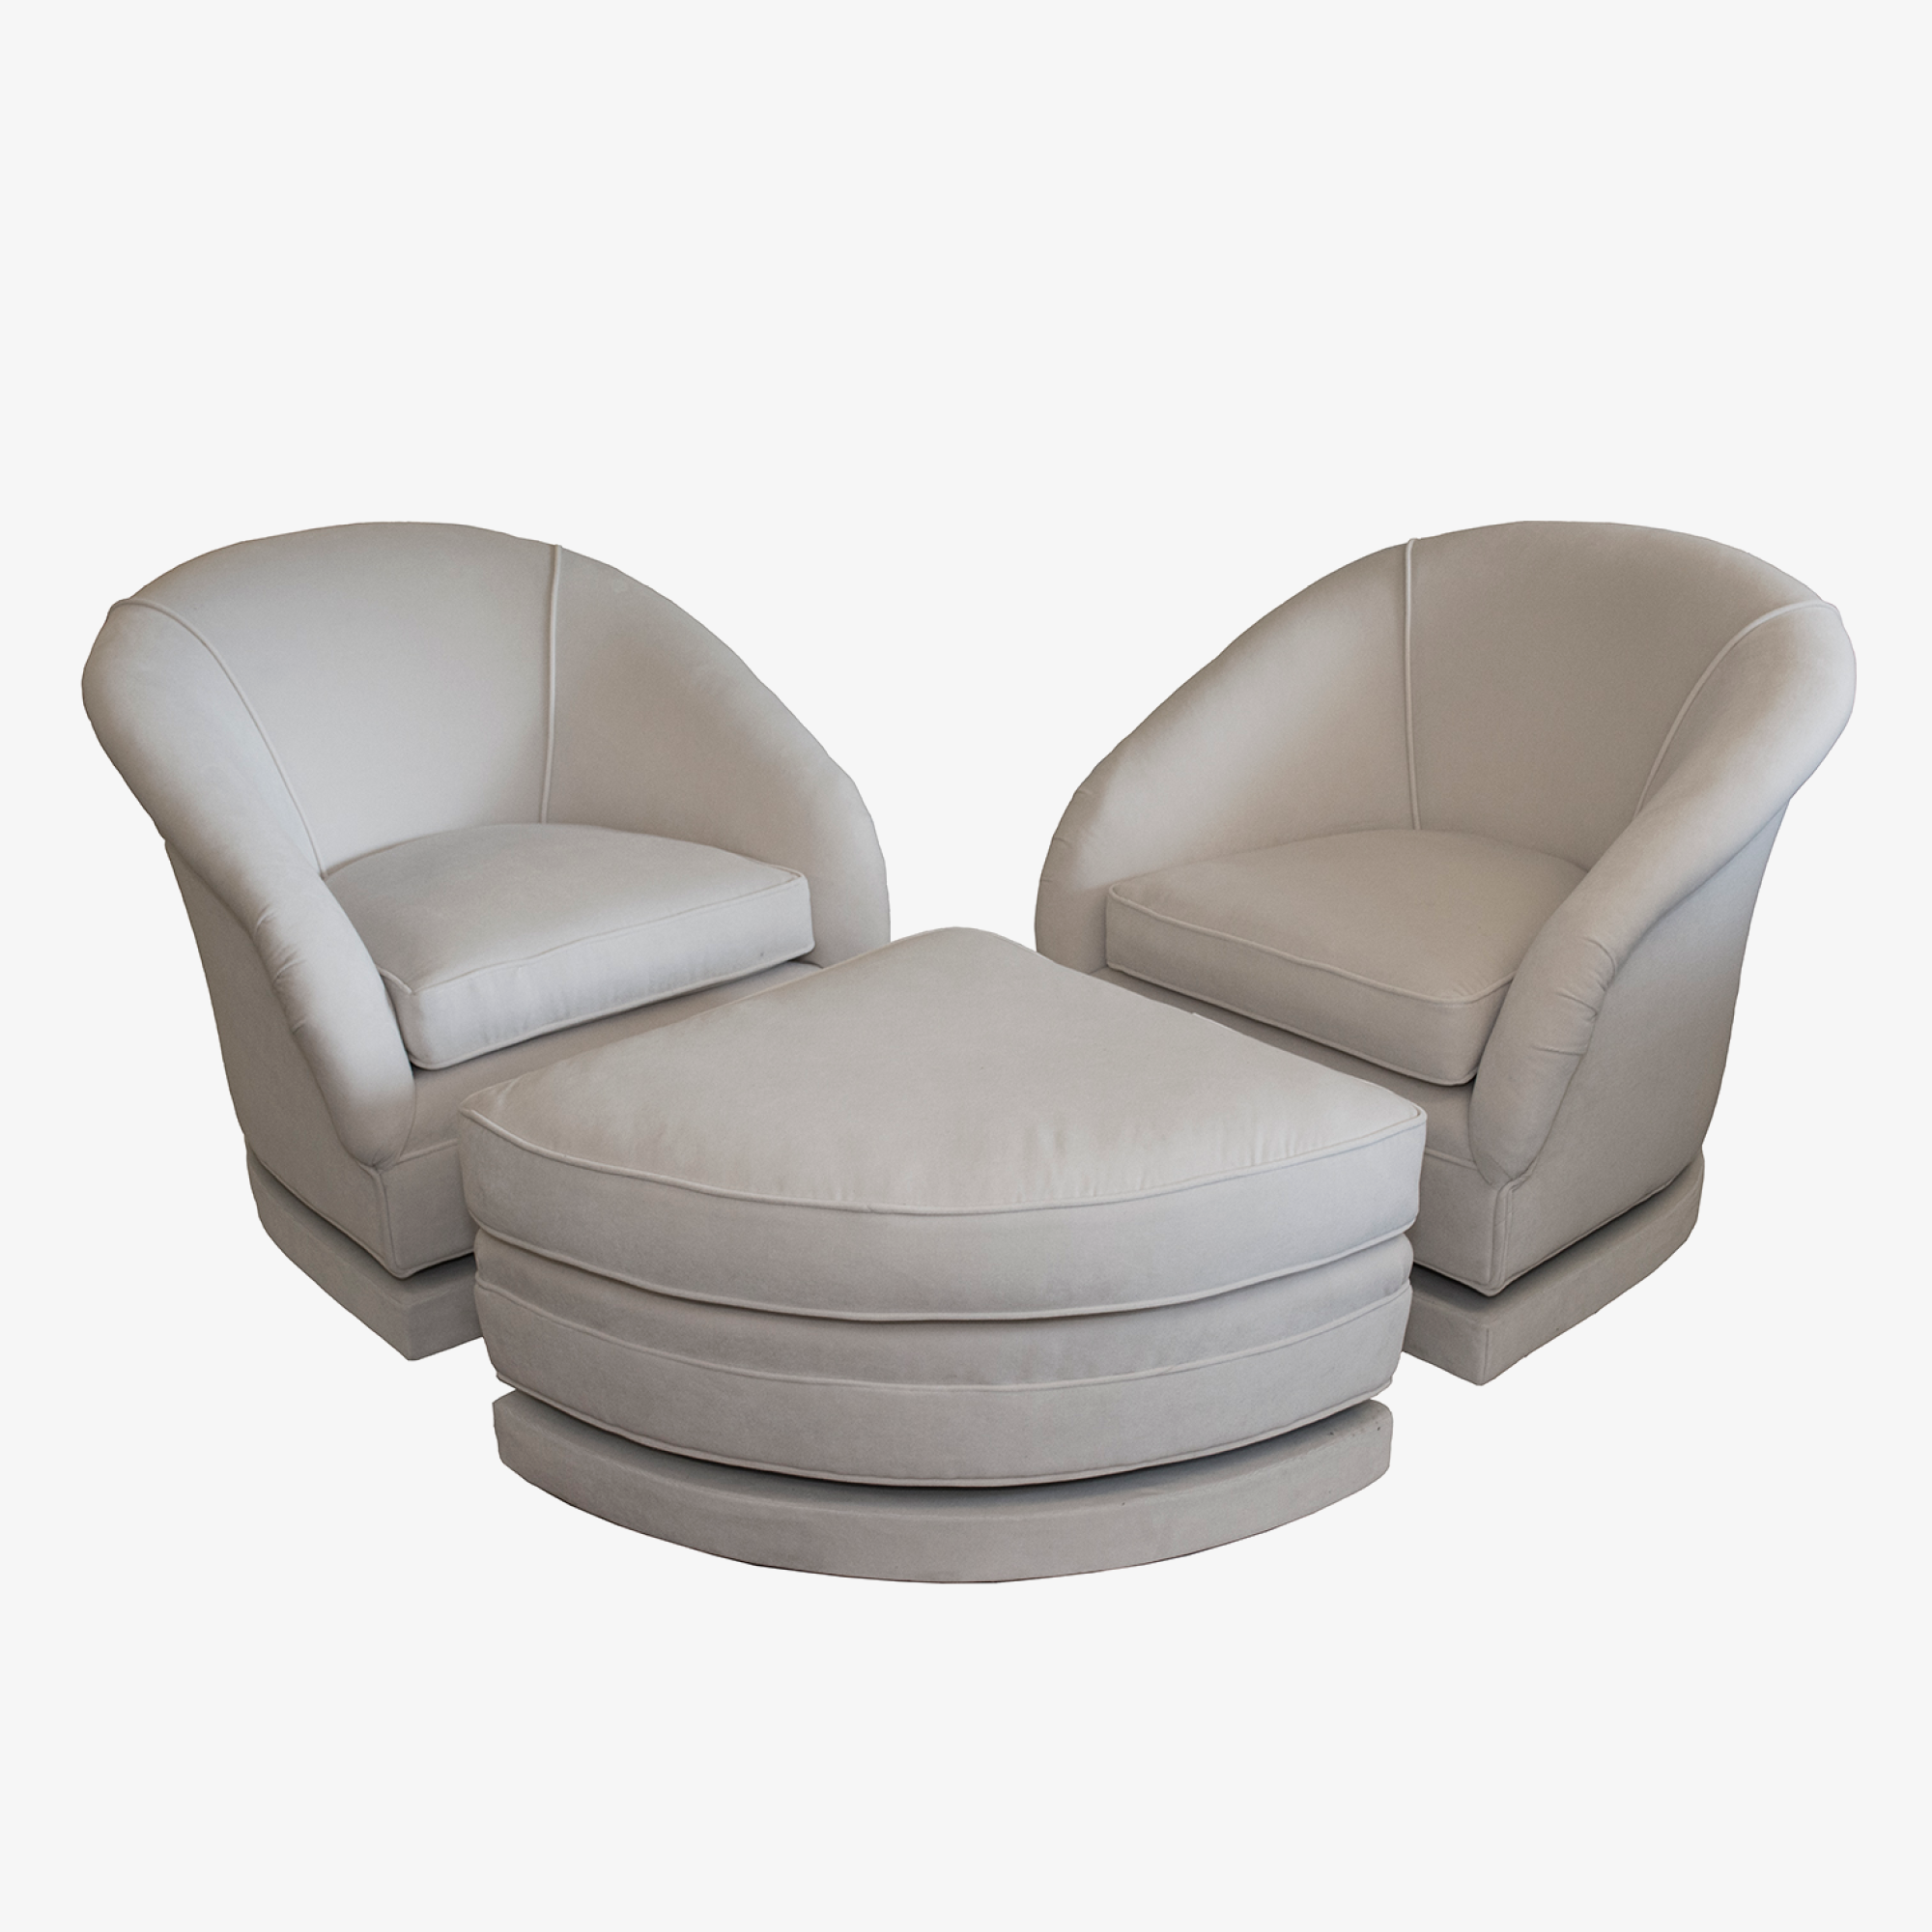 Bespoke Set of Swivel Chairs with Custom Ottoman 3.png